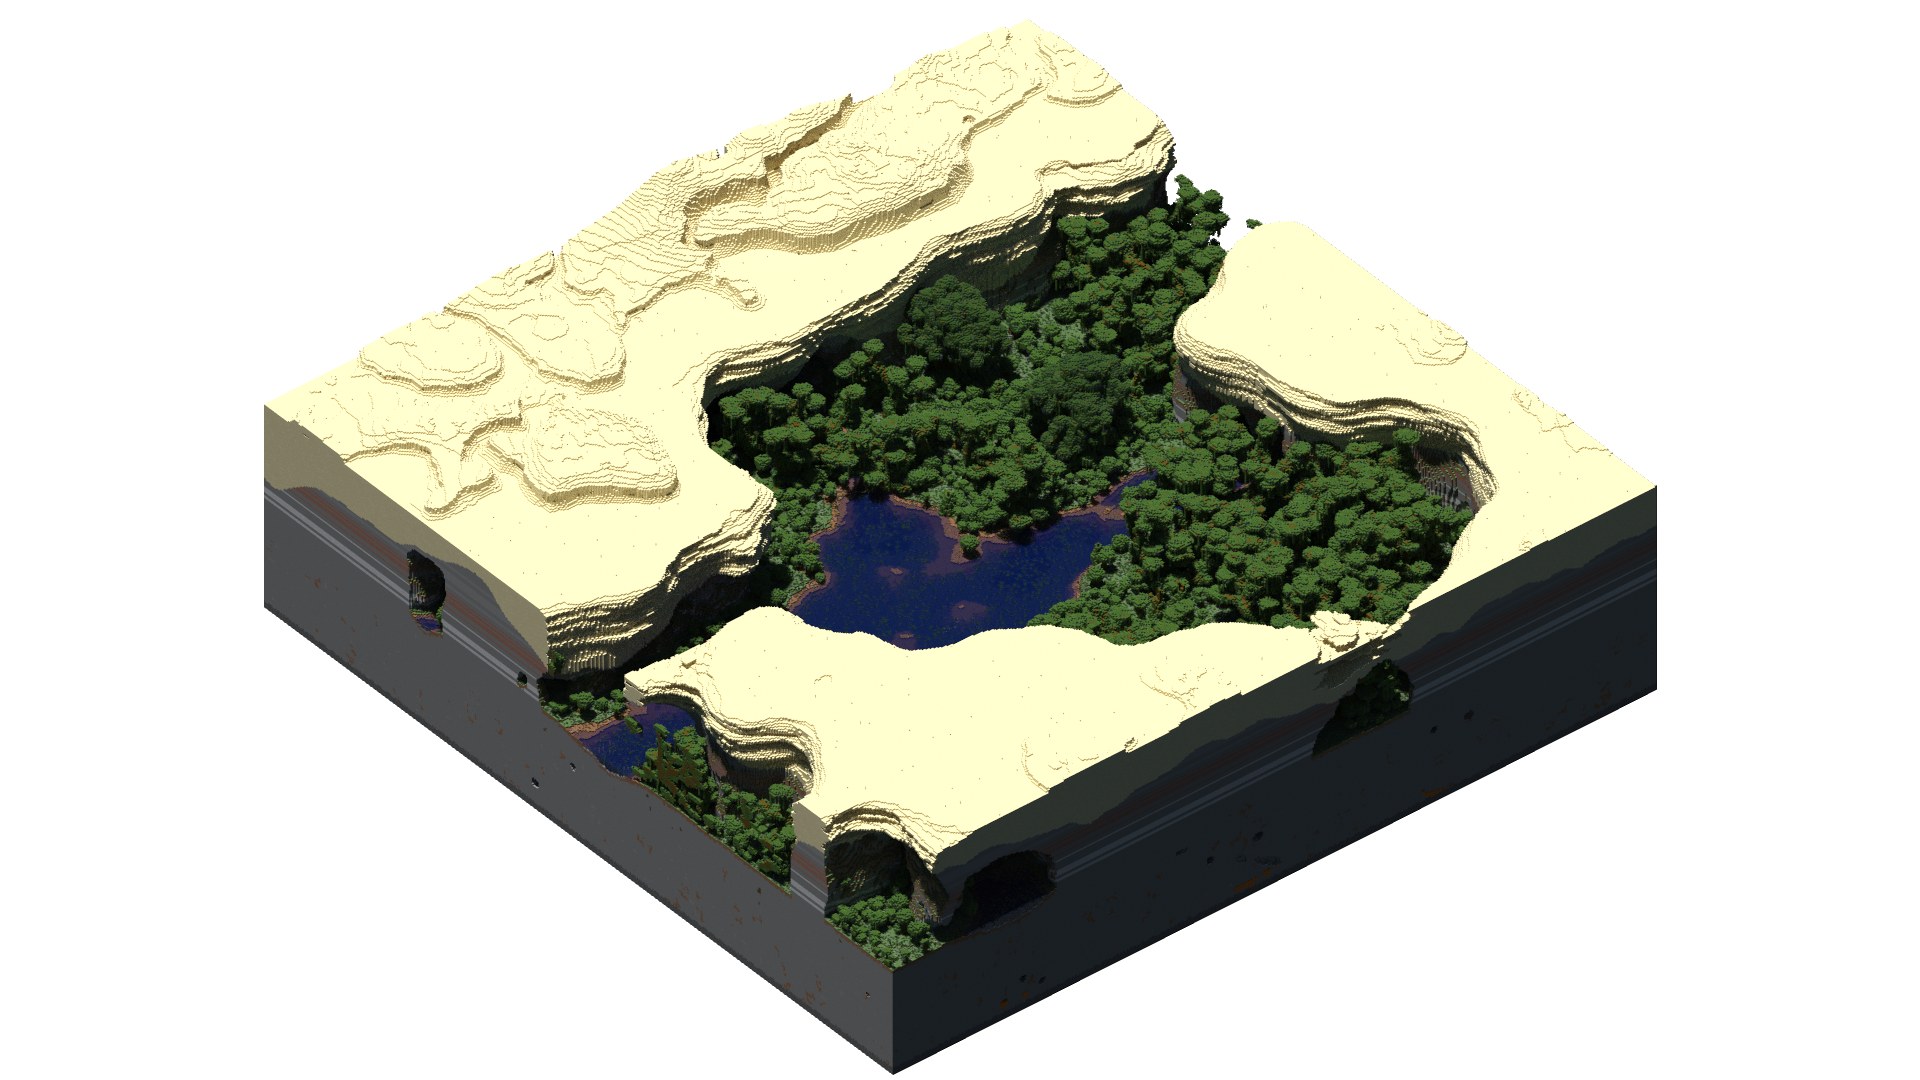 isometric cut section of an oasis